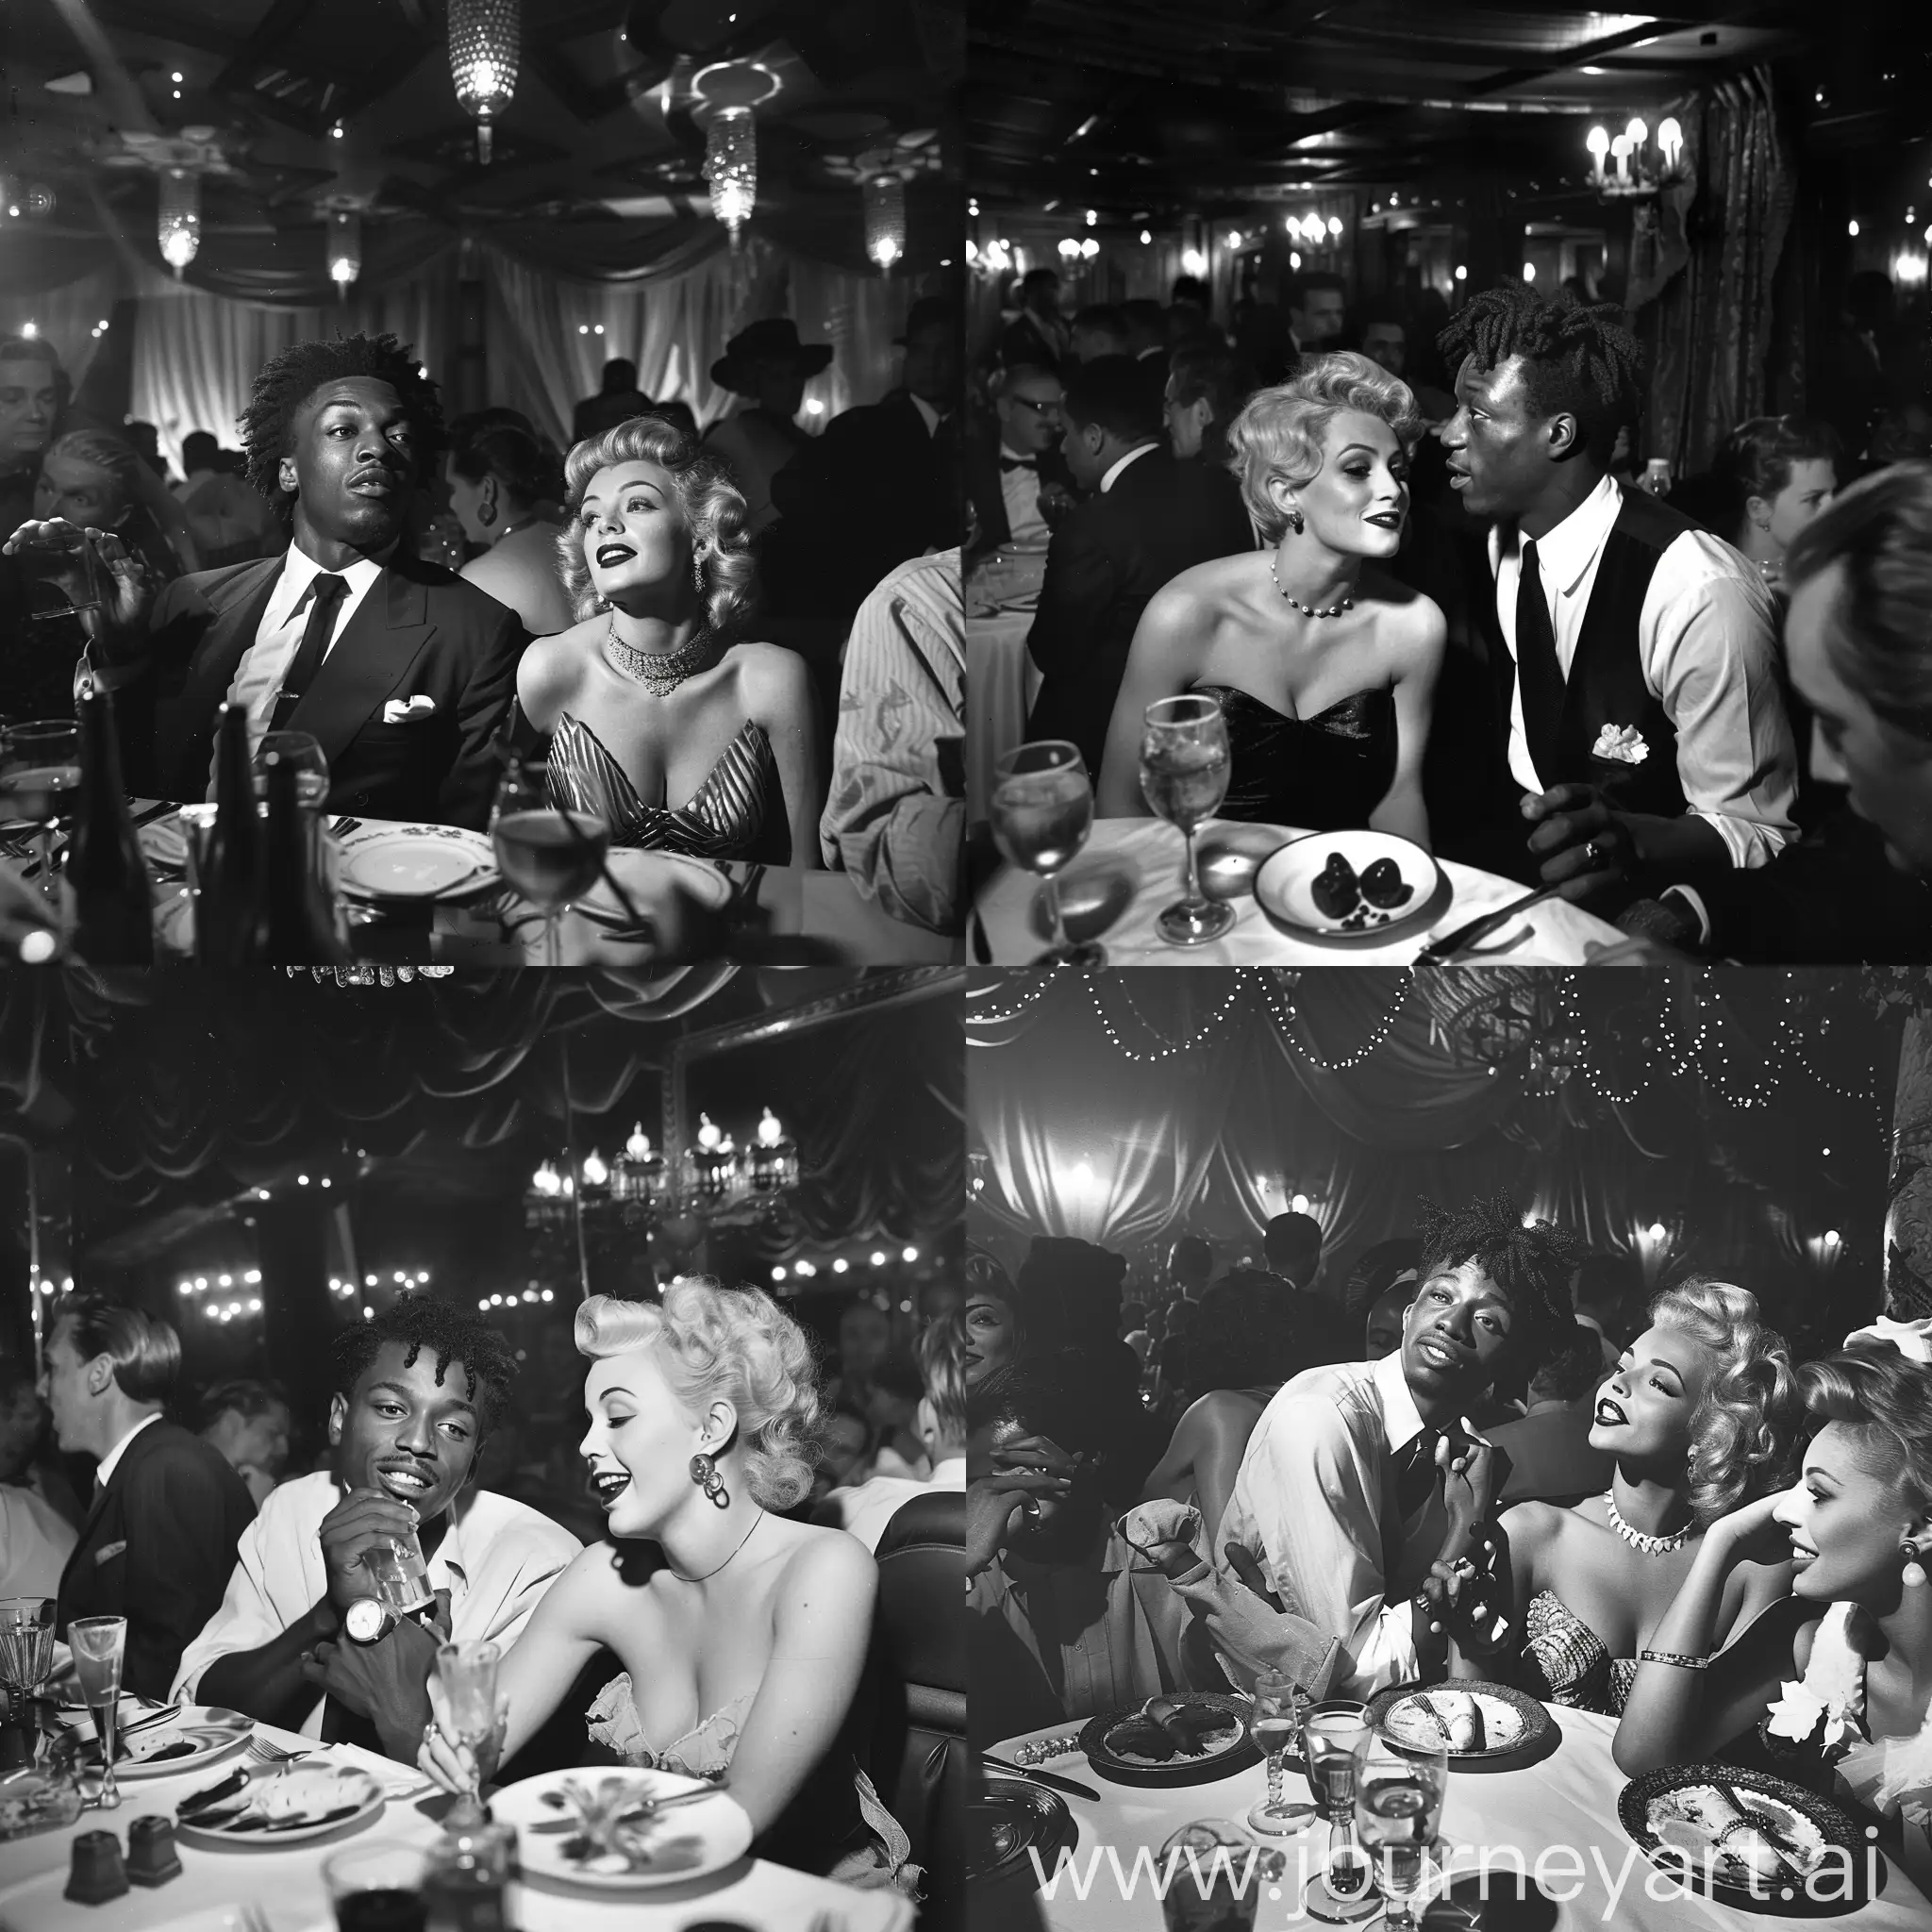 Juice-WRLD-and-Marilyn-Monroe-at-a-Fancy-Restaurant-in-a-1960s-Black-and-White-Photograph